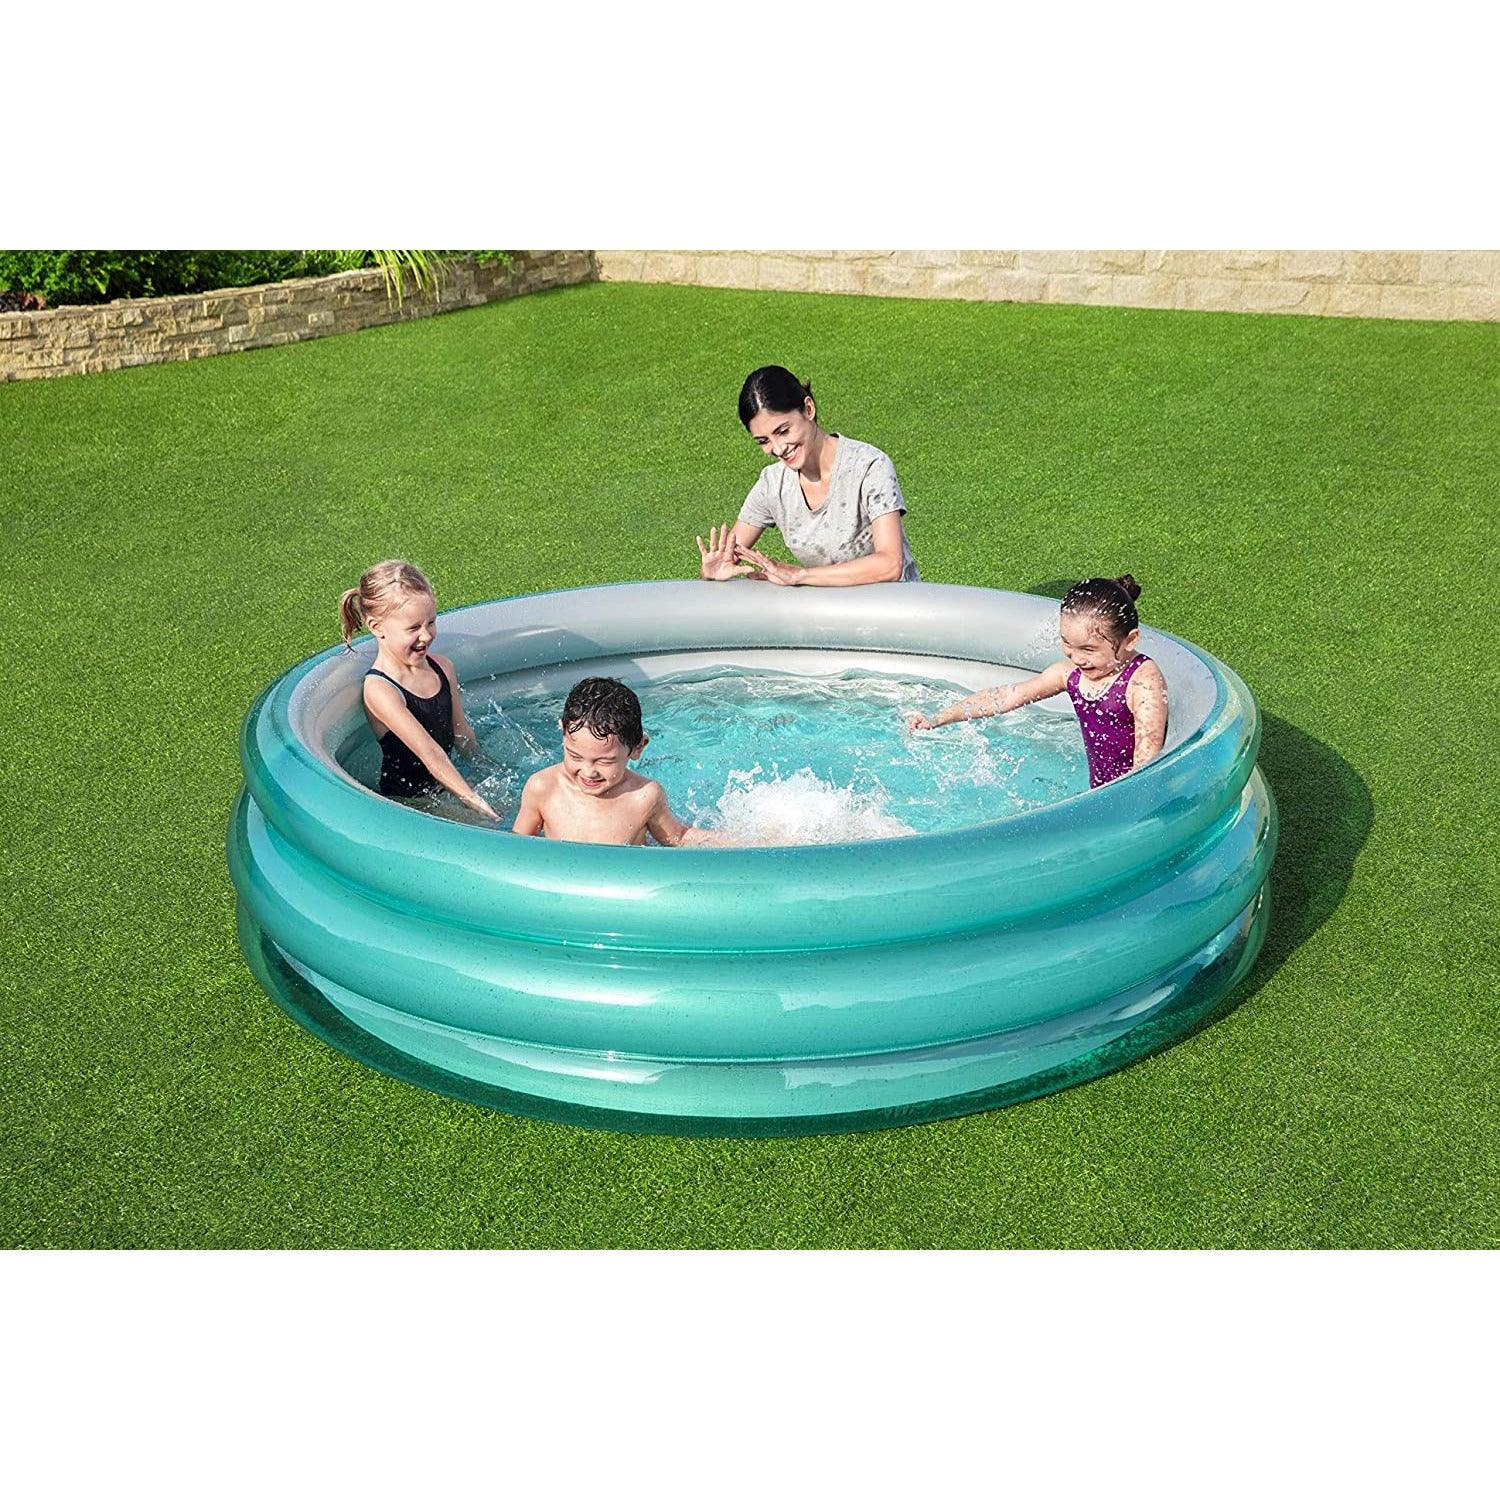 Bestway 51043 Big Metallic 3-Ring Pool 201X53 - BumbleToys - 8-13 Years, Boys, Eagle Plus, Floaters, Girls, Sand Toys Pools & Inflatables